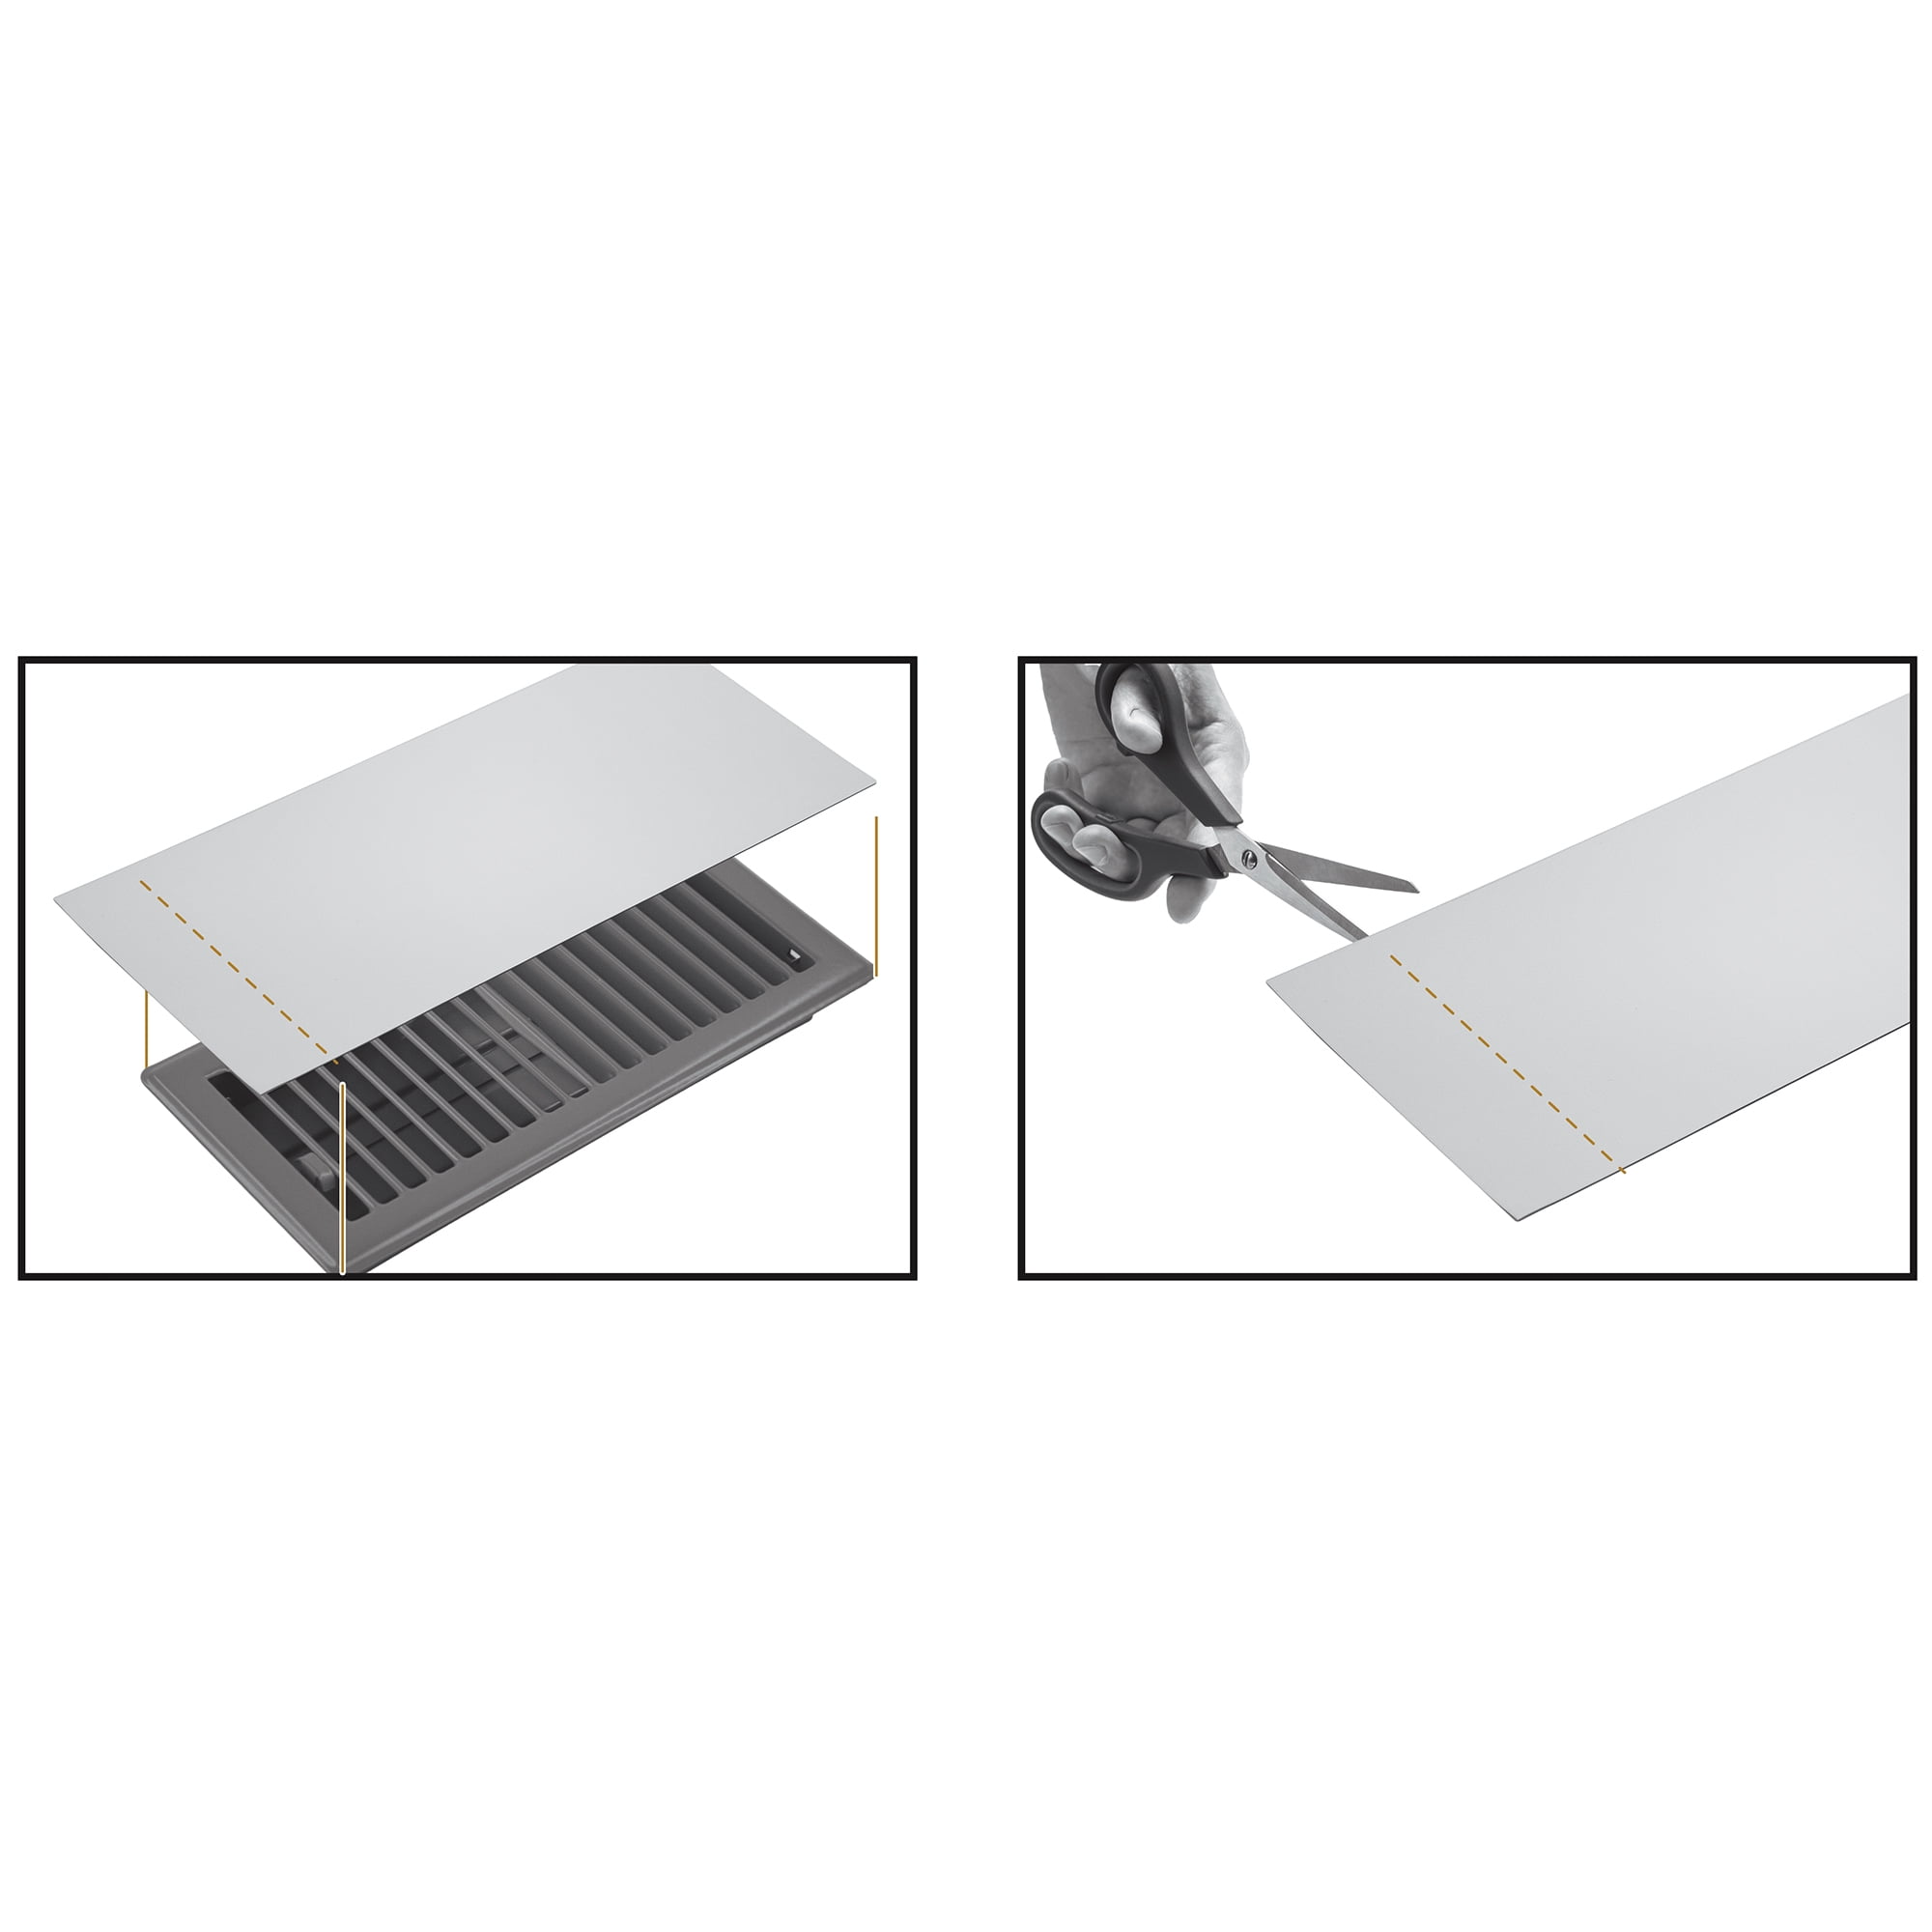 Frost King Magnetic Vent Covers for Wall, Floor or Ceiling, 5.5 inch Wide x 12 inch Long, White, Pack of 4 MC512WT